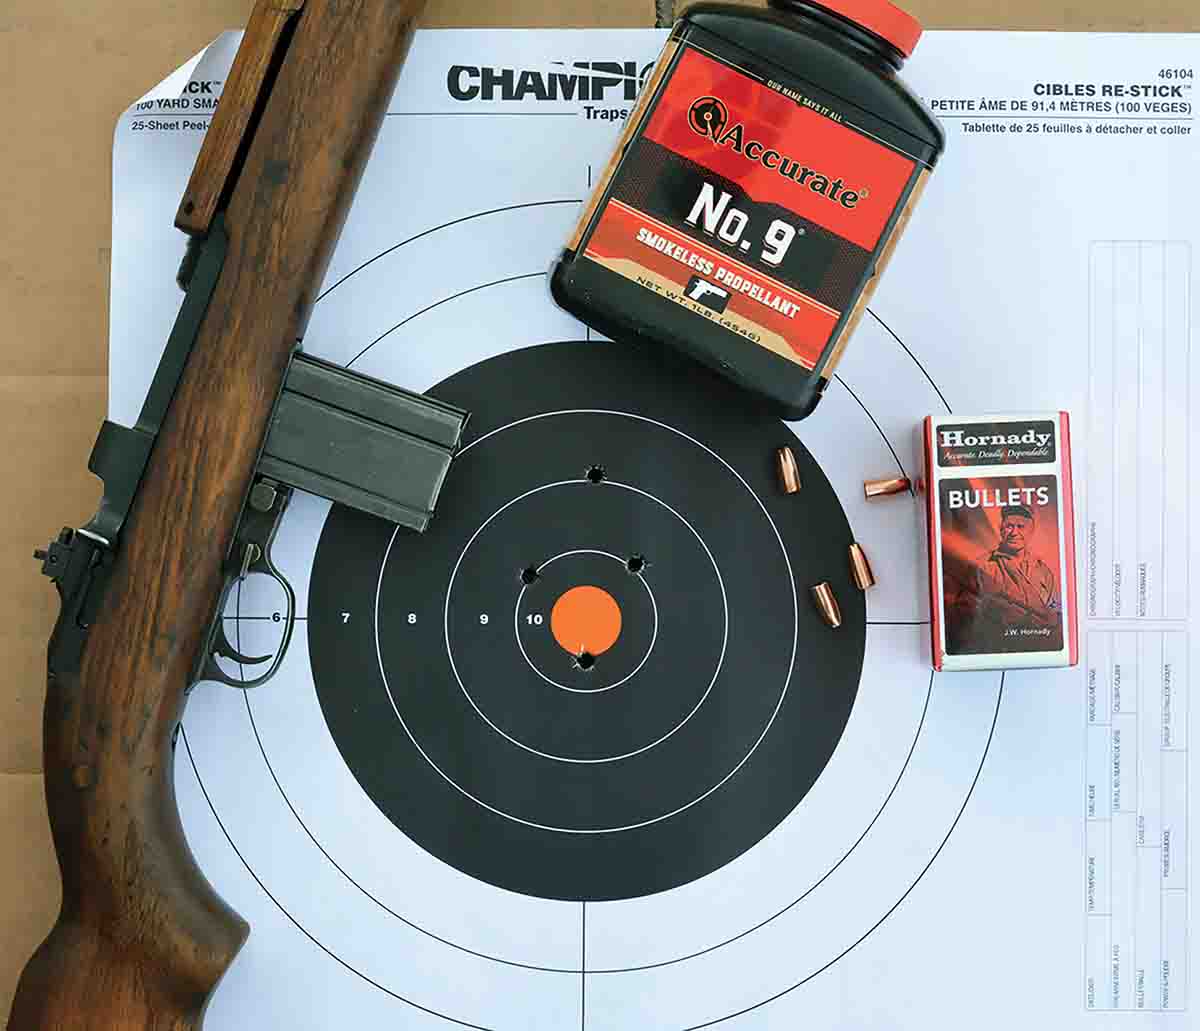 The M1 Carbine is not known for outstanding accuracy, but if the bore is in reasonable condition and the action is properly bedded within the stock, along with quality handloads, 3-inch groups at 100 yards are often possible.